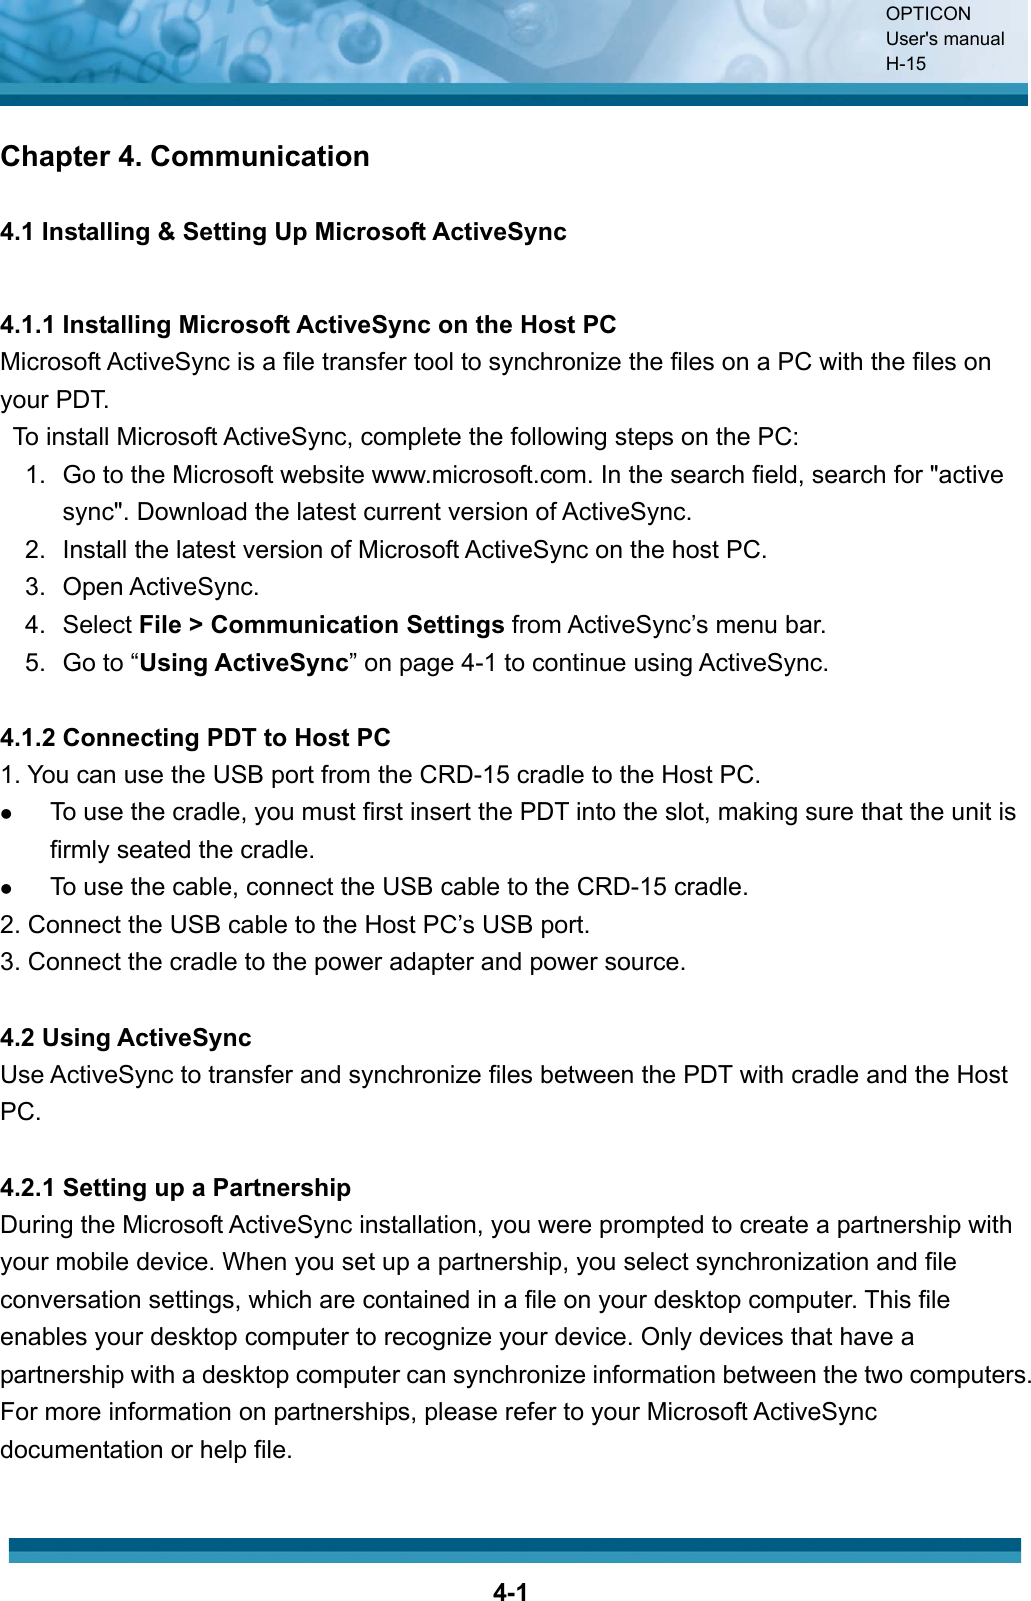 OPTICON User&apos;s manual H-154-1Chapter 4. Communication 4.1 Installing &amp; Setting Up Microsoft ActiveSync 4.1.1 Installing Microsoft ActiveSync on the Host PC Microsoft ActiveSync is a file transfer tool to synchronize the files on a PC with the files on your PDT.     To install Microsoft ActiveSync, complete the following steps on the PC: 1.  Go to the Microsoft website www.microsoft.com. In the search field, search for &quot;active sync&quot;. Download the latest current version of ActiveSync. 2.  Install the latest version of Microsoft ActiveSync on the host PC. 3. Open ActiveSync. 4. Select File &gt; Communication Settings from ActiveSync’s menu bar. 5. Go to “Using ActiveSync” on page 4-1 to continue using ActiveSync. 4.1.2 Connecting PDT to Host PC 1. You can use the USB port from the CRD-15 cradle to the Host PC. zTo use the cradle, you must first insert the PDT into the slot, making sure that the unit is firmly seated the cradle.zTo use the cable, connect the USB cable to the CRD-15 cradle.2. Connect the USB cable to the Host PC’s USB port. 3. Connect the cradle to the power adapter and power source.4.2 Using ActiveSync Use ActiveSync to transfer and synchronize files between the PDT with cradle and the Host PC.4.2.1 Setting up a Partnership During the Microsoft ActiveSync installation, you were prompted to create a partnership with your mobile device. When you set up a partnership, you select synchronization and file conversation settings, which are contained in a file on your desktop computer. This file enables your desktop computer to recognize your device. Only devices that have a partnership with a desktop computer can synchronize information between the two computers. For more information on partnerships, please refer to your Microsoft ActiveSync documentation or help file.   